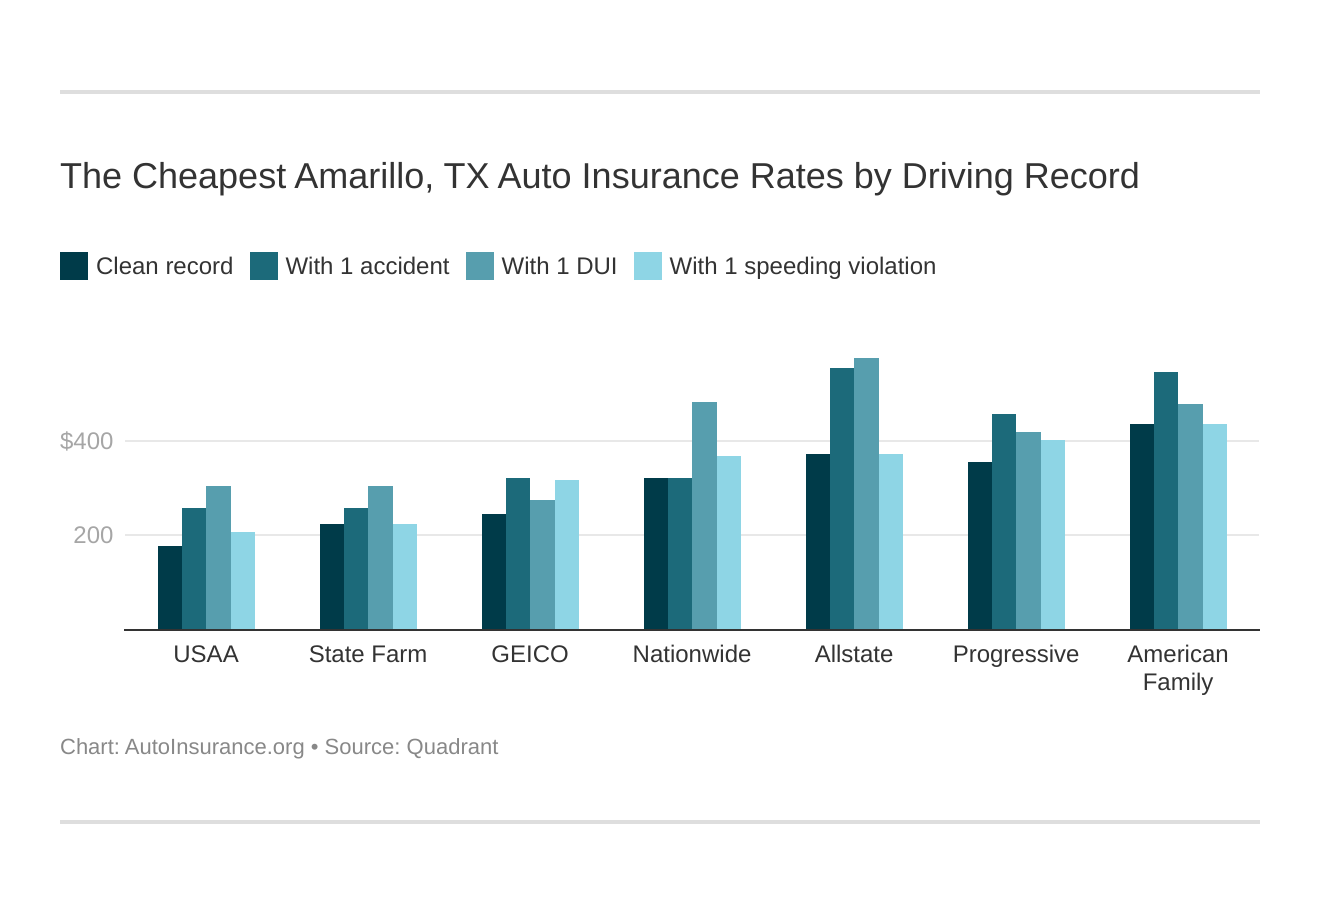 The Cheapest Amarillo, TX Auto Insurance Rates by Driving Record